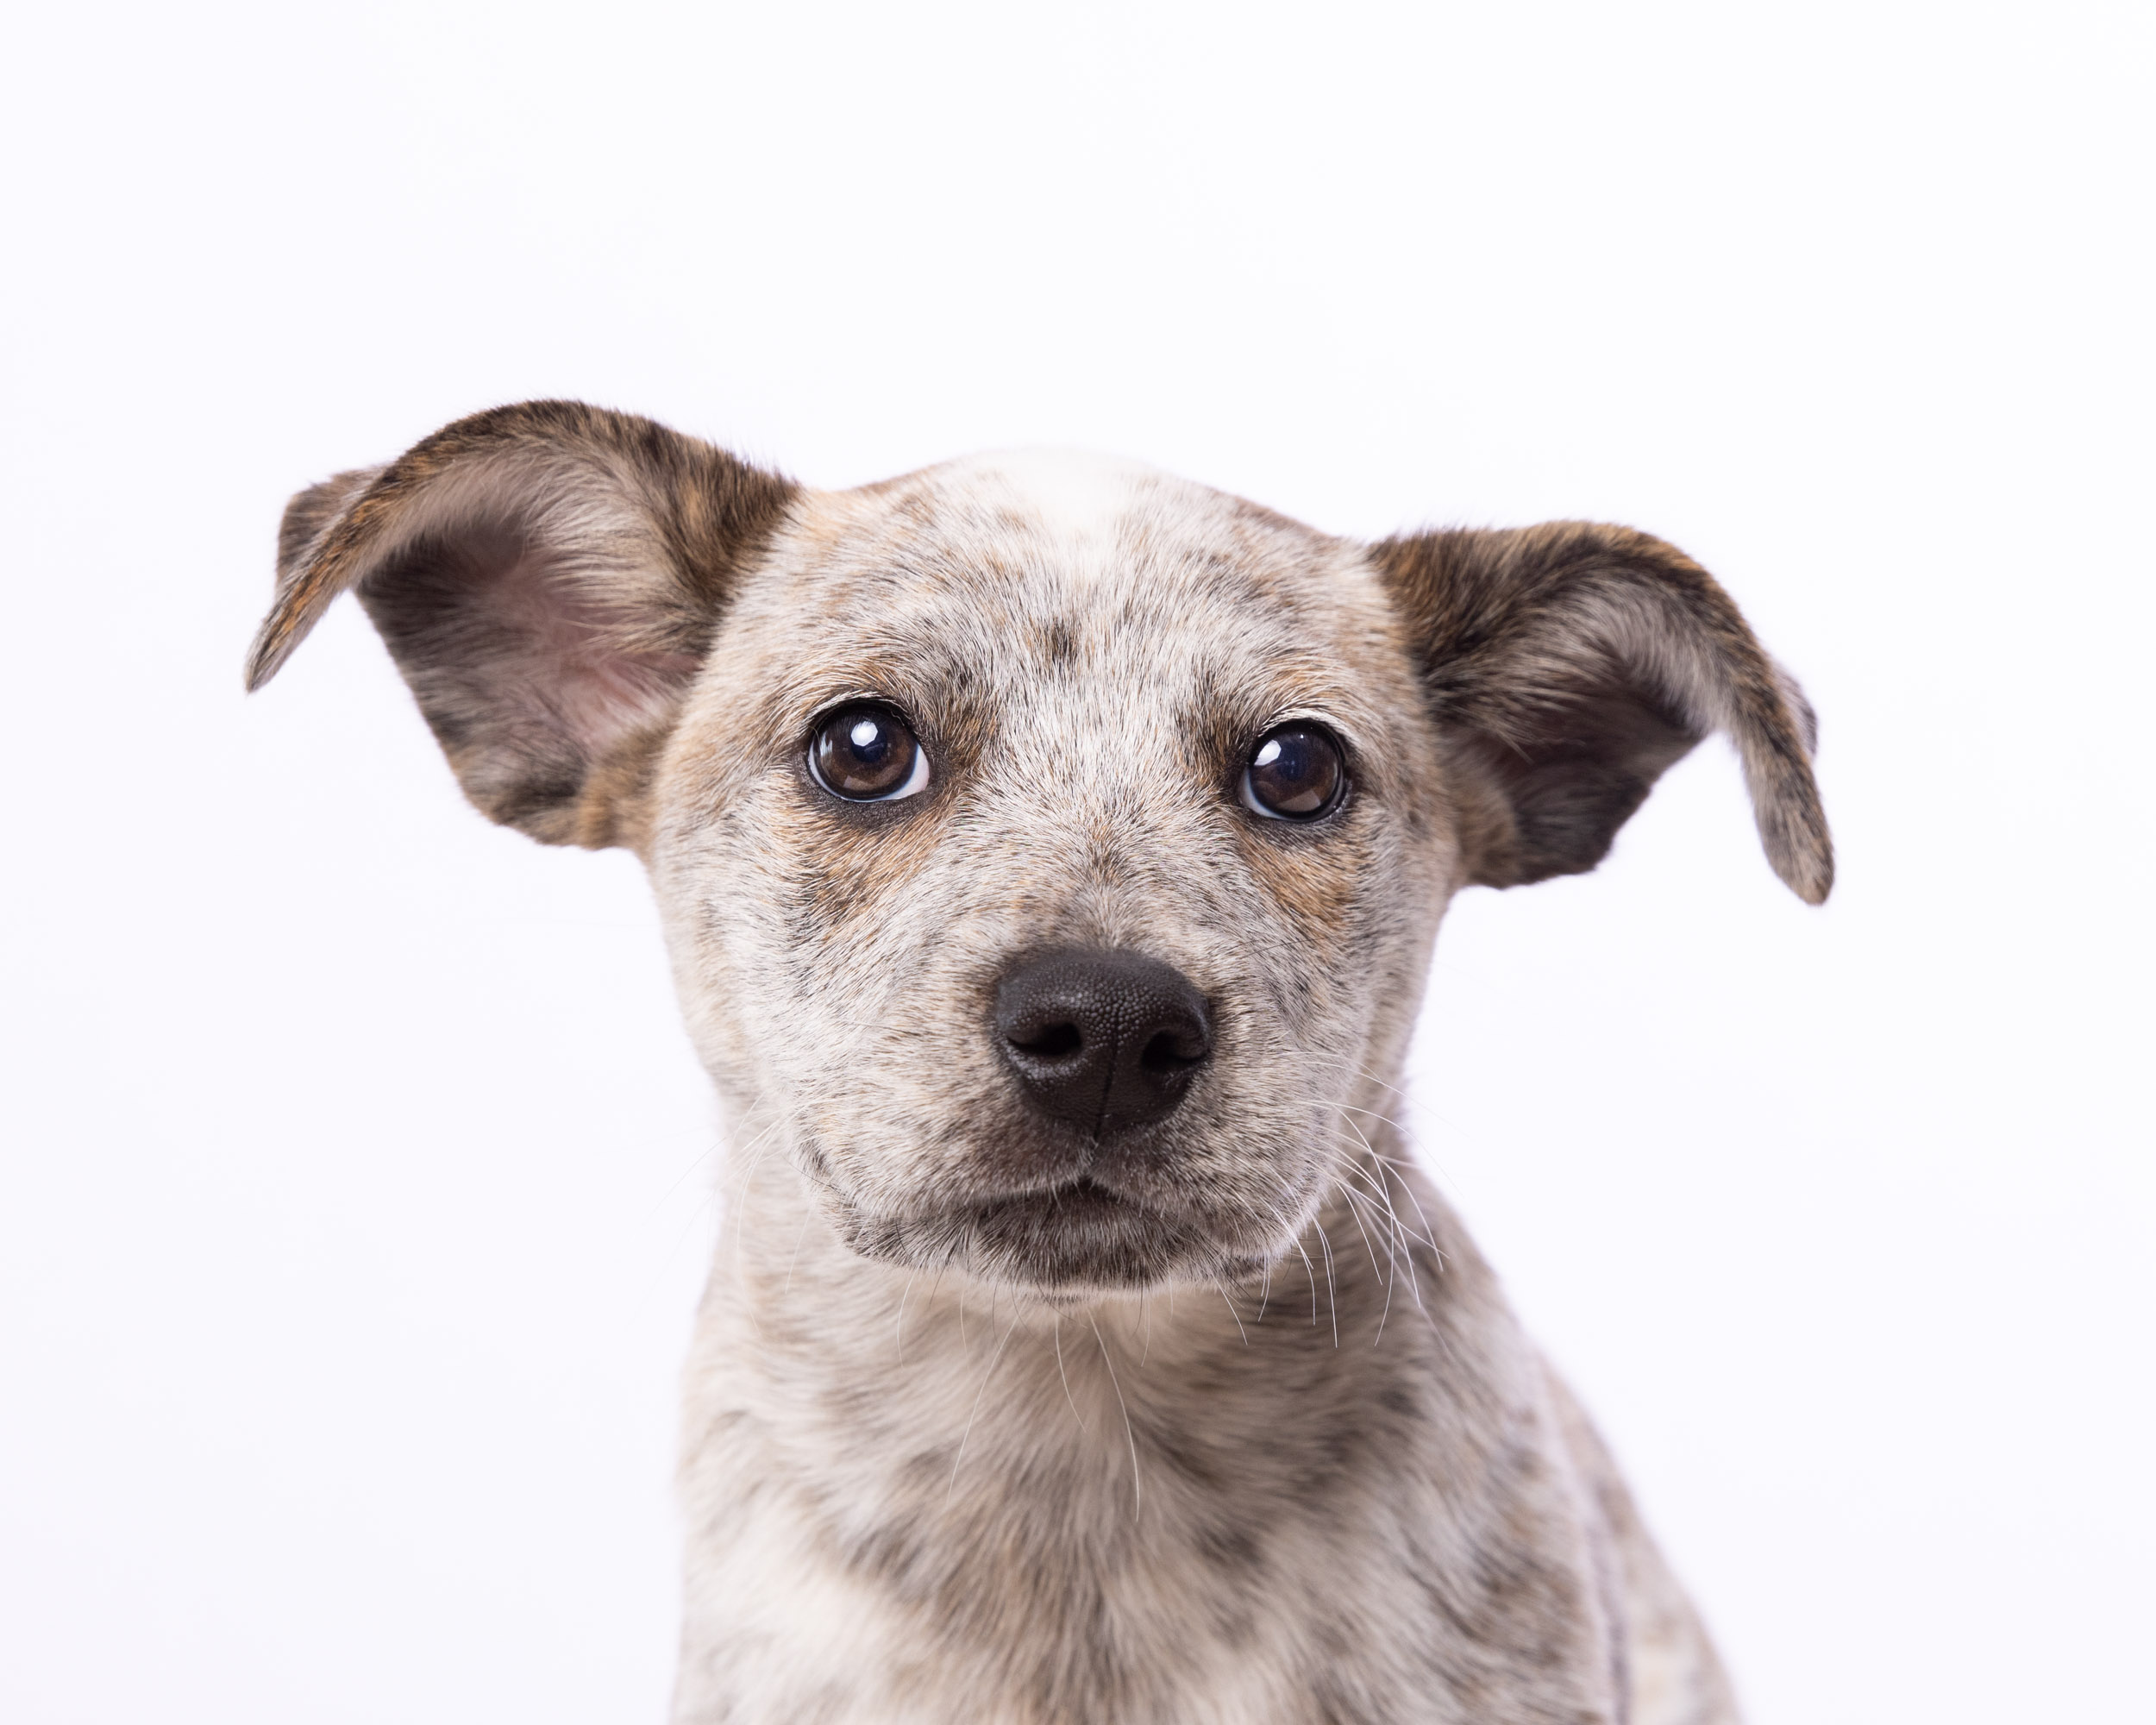 Dog Studio Photography | Puppy Portrait on White by Mark Rogers